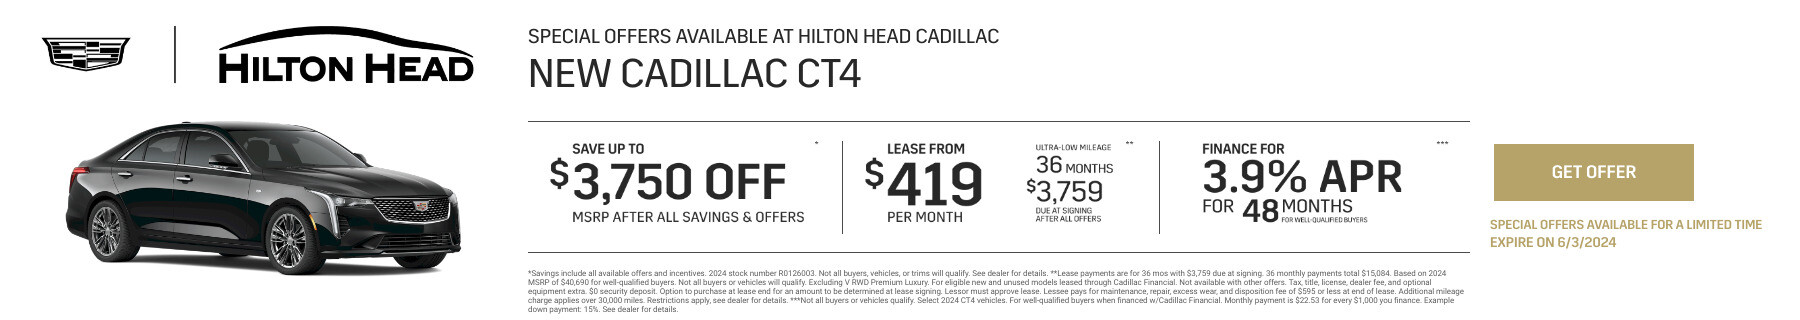 New Cadillac CT4 Current Deals and Offers in Savannah, GA